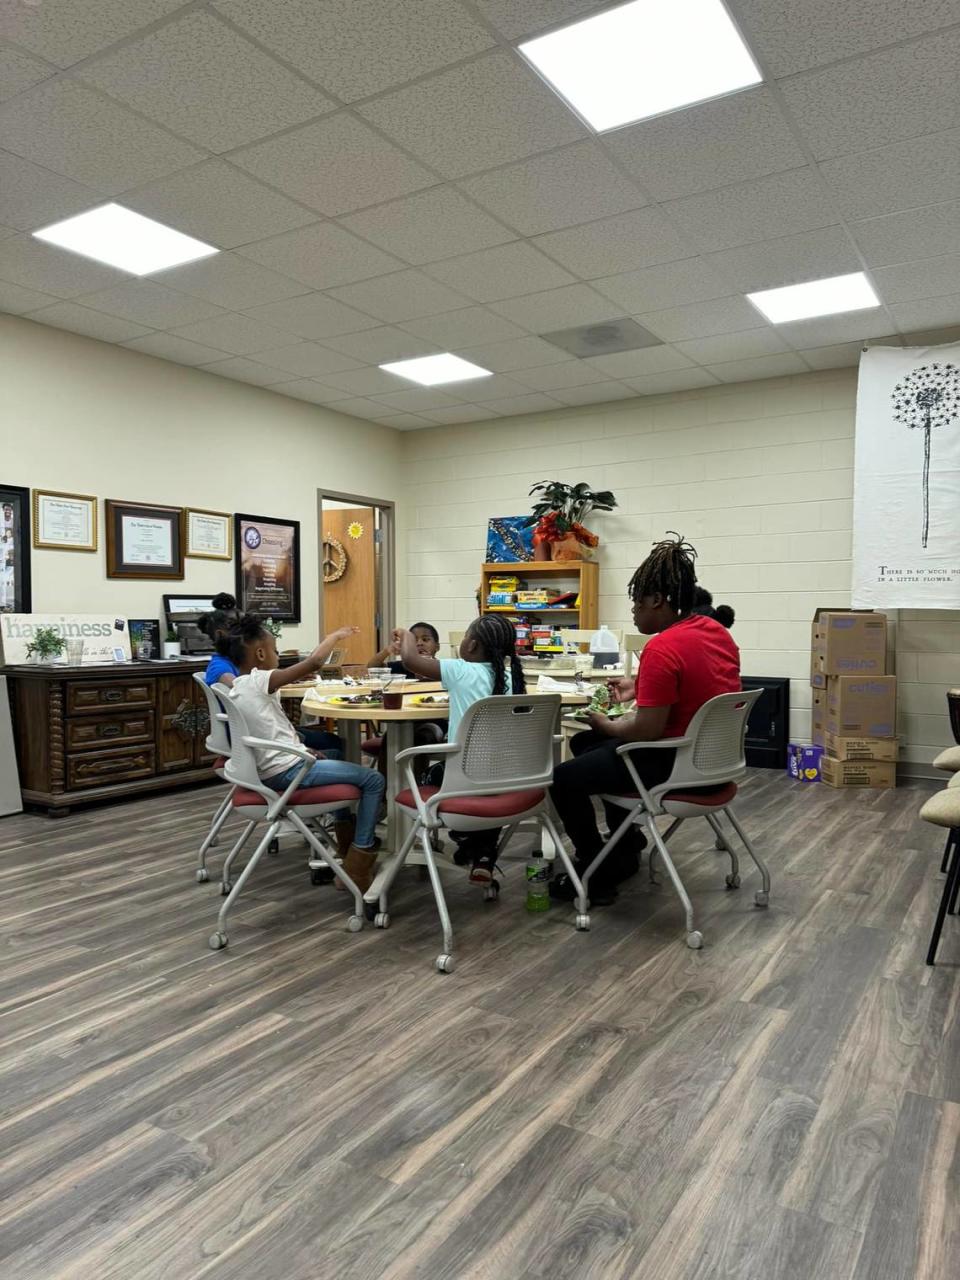 Every Wednesday at 4 p.m. at the Booker T. Washington Center, the Choosing Peace program teaches Macon-Bibb County kids about peaceful conflict resolution in an effort to reduce violence and improve mental health.